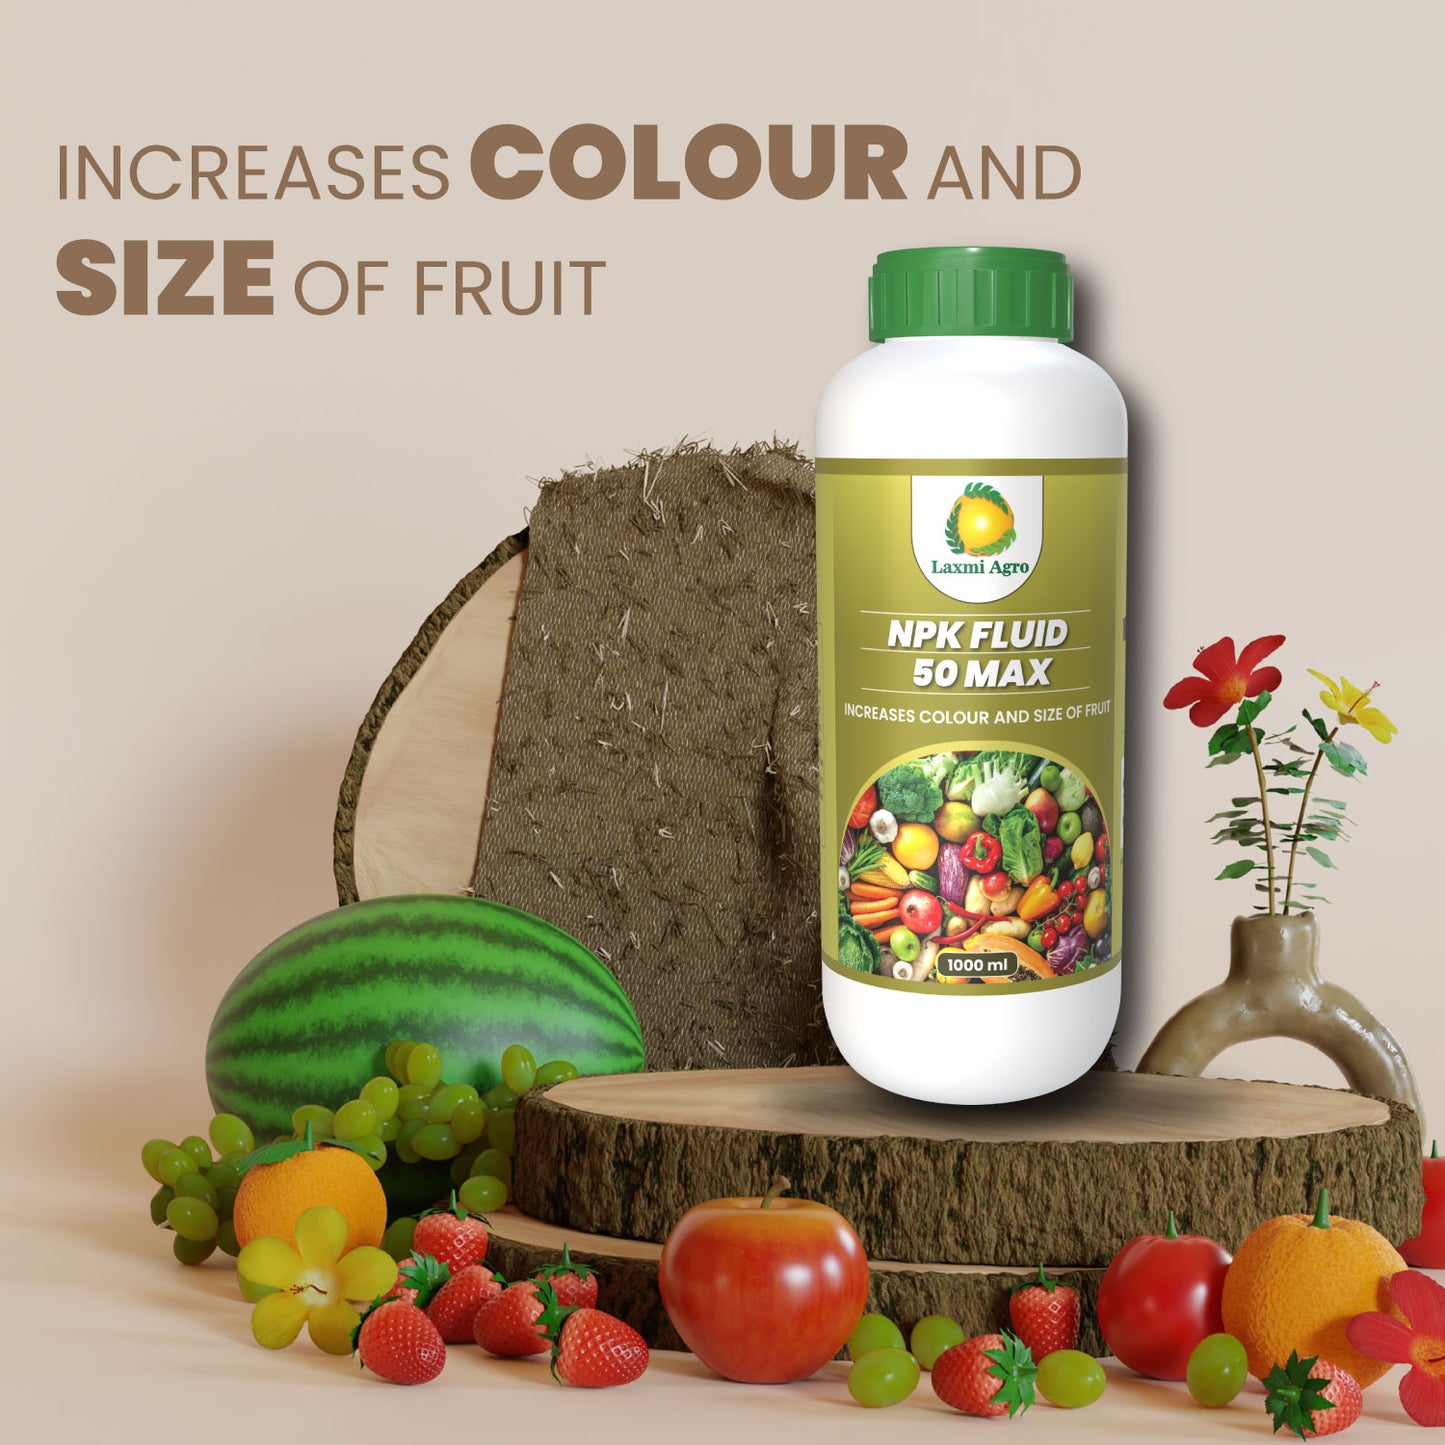 Laxmi Agro NPK FLUID 50 MAX| Fruiting and Flowering for Gardening | Increases Colour and Size of Fruit